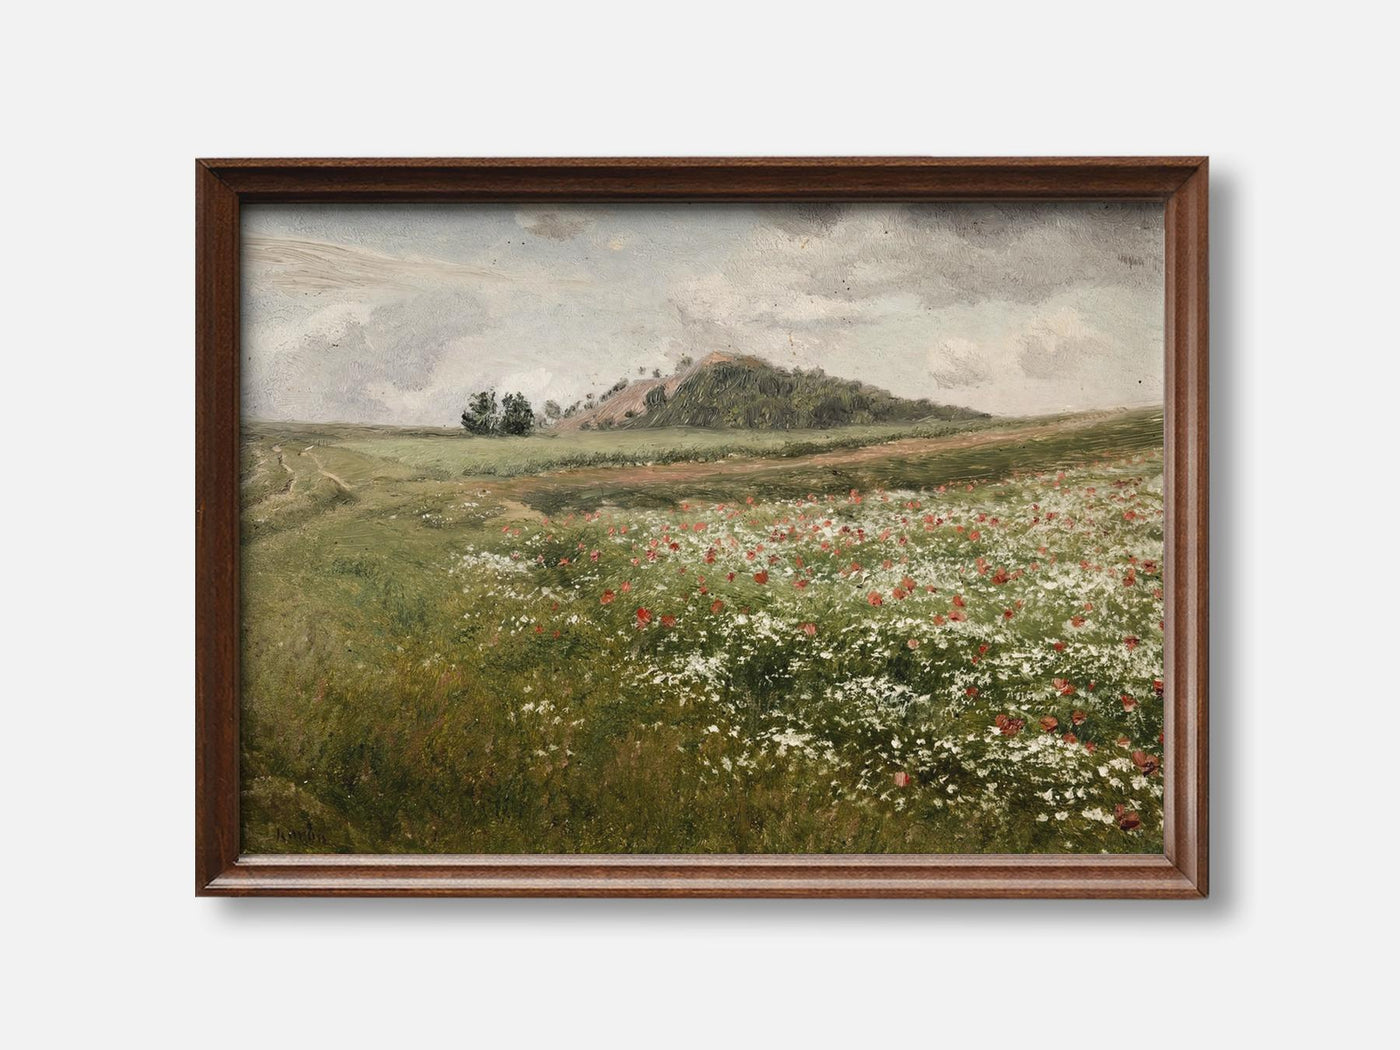 Fields with Wild Poppies mockup - A_spr59-V1-PC_F+WA-SS_1-PS_5x7-C_def variant